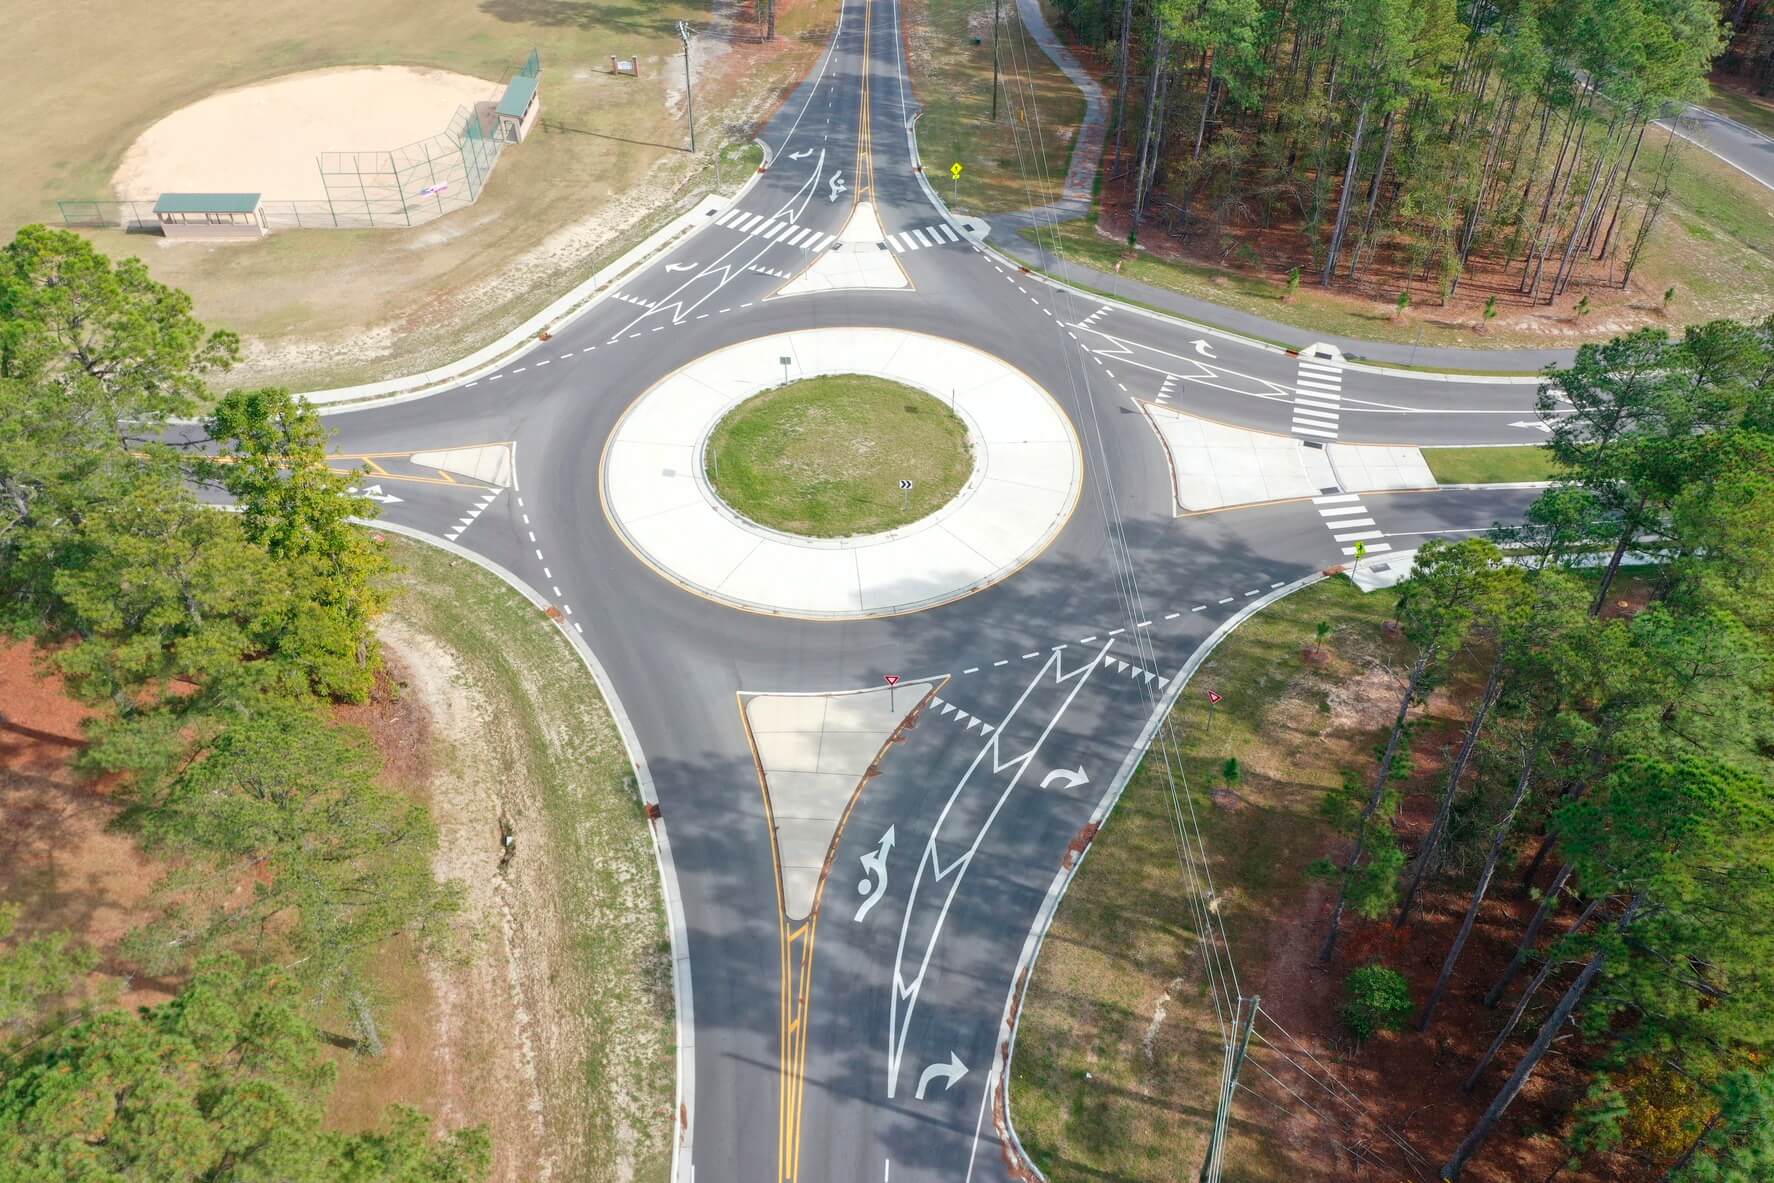 Arial view of the Moore County Roundabout with 4 outlets.